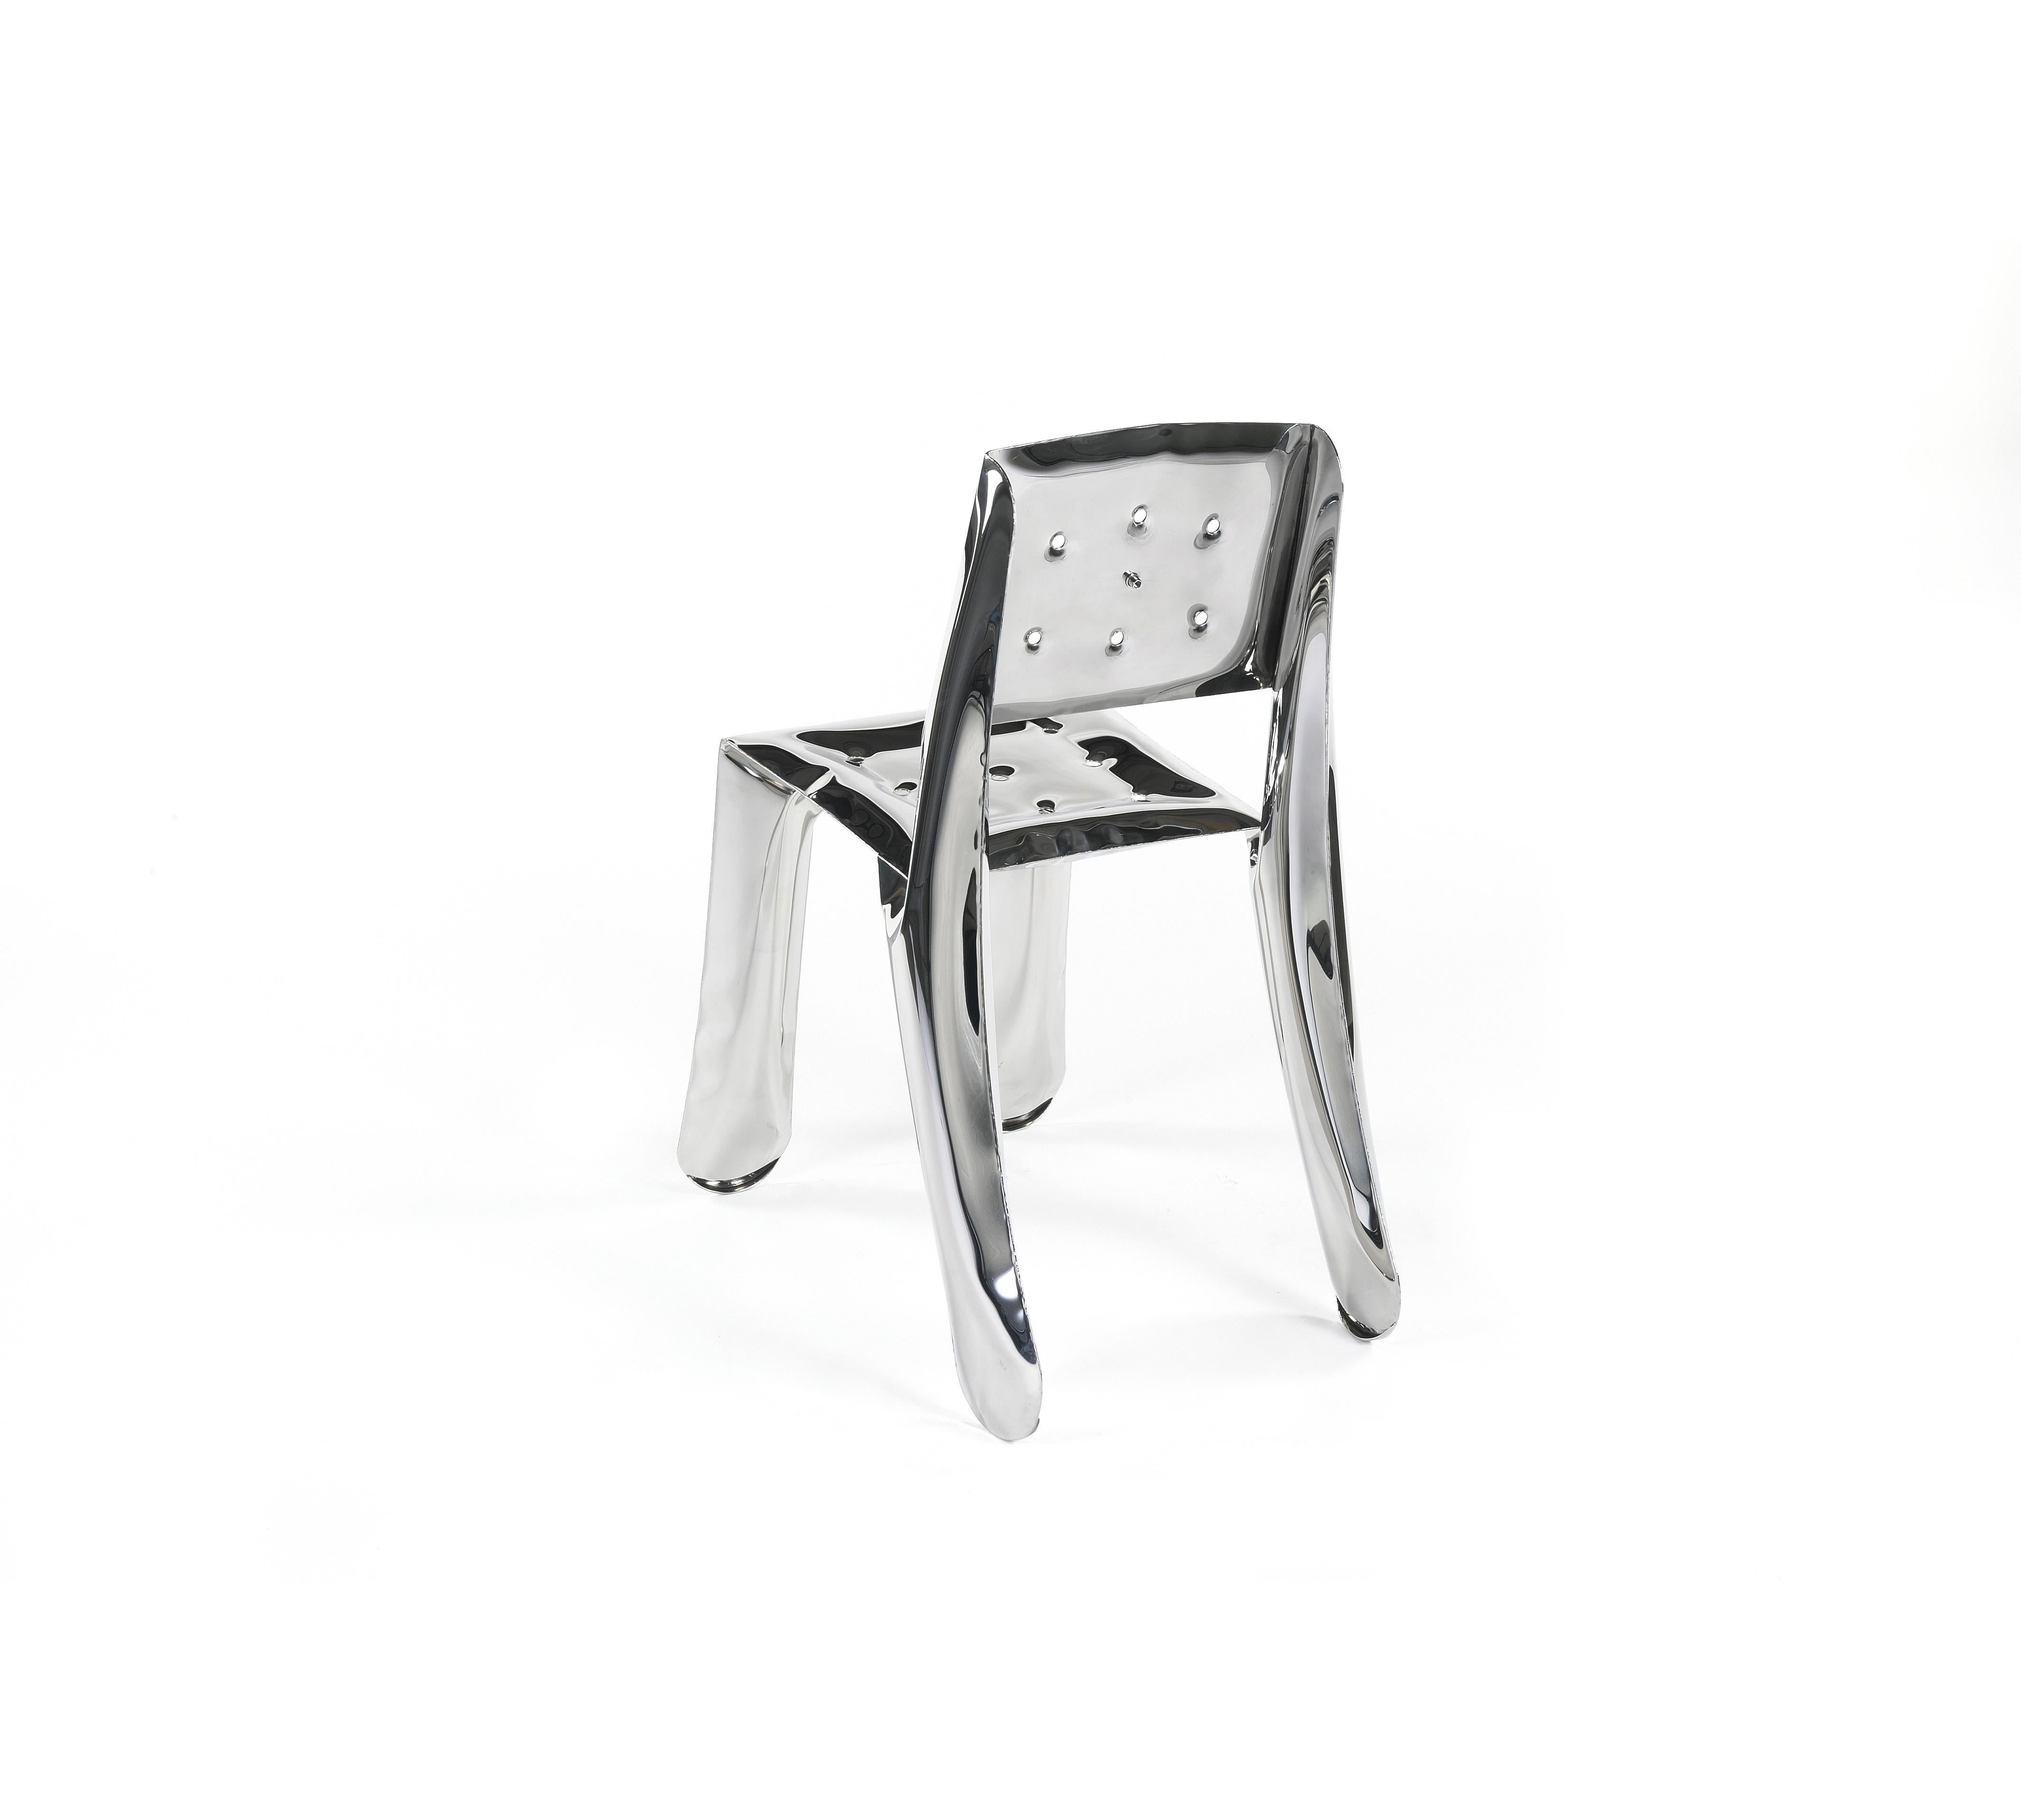 Polished Stainless Steel Chippensteel 0.5 Sculptural Chair by Zieta For Sale